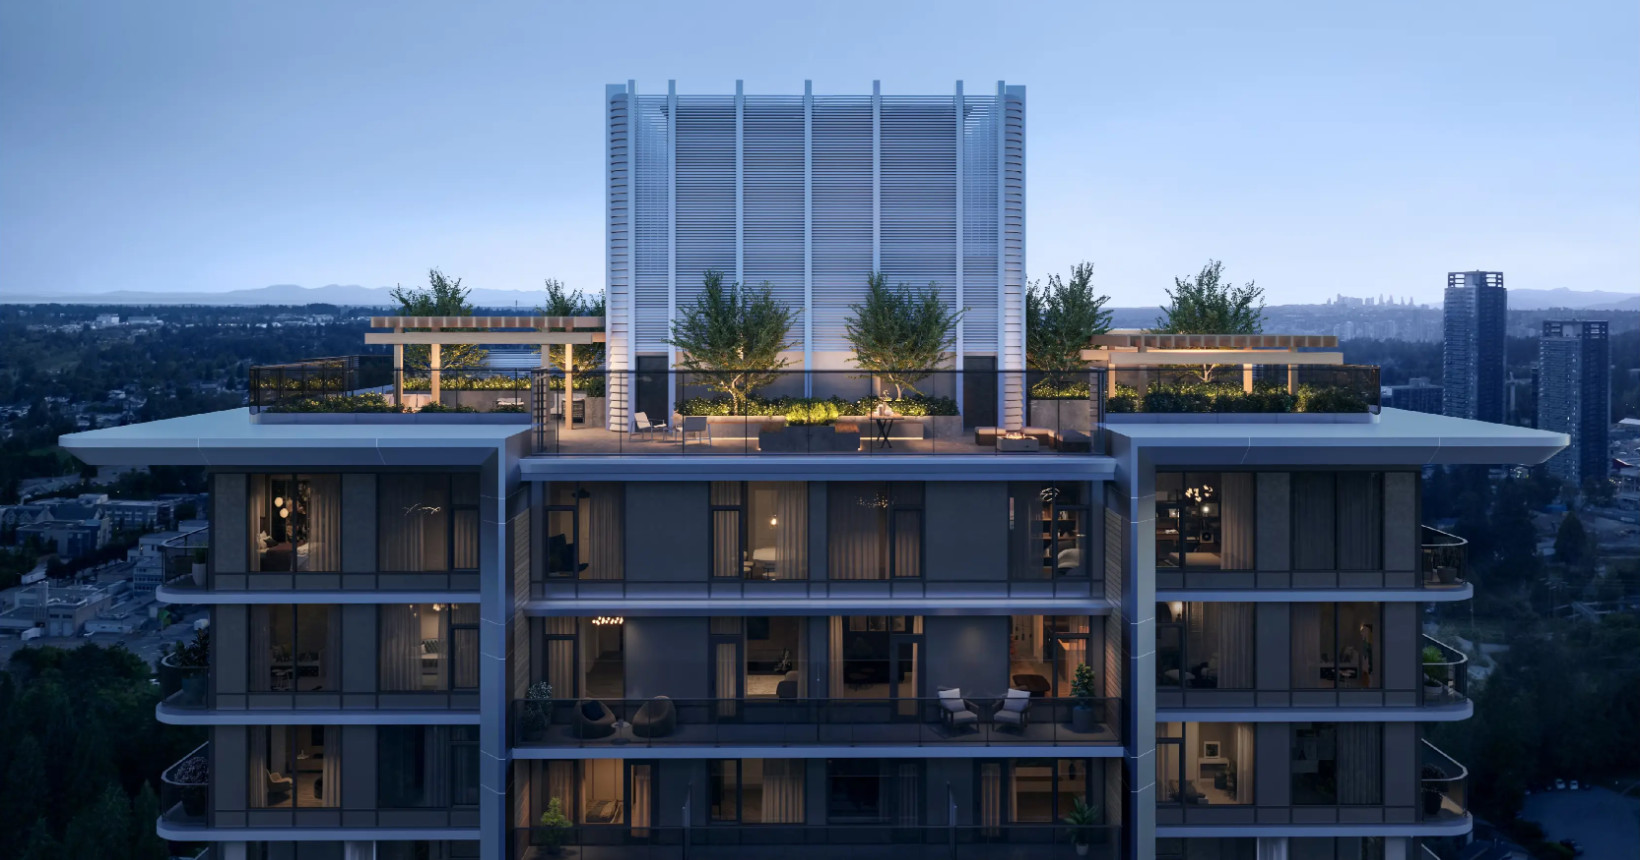 ParksVille 96 by Darshan Builders is a 34-storey tower with 7 townhomes, and 370 condominiums.